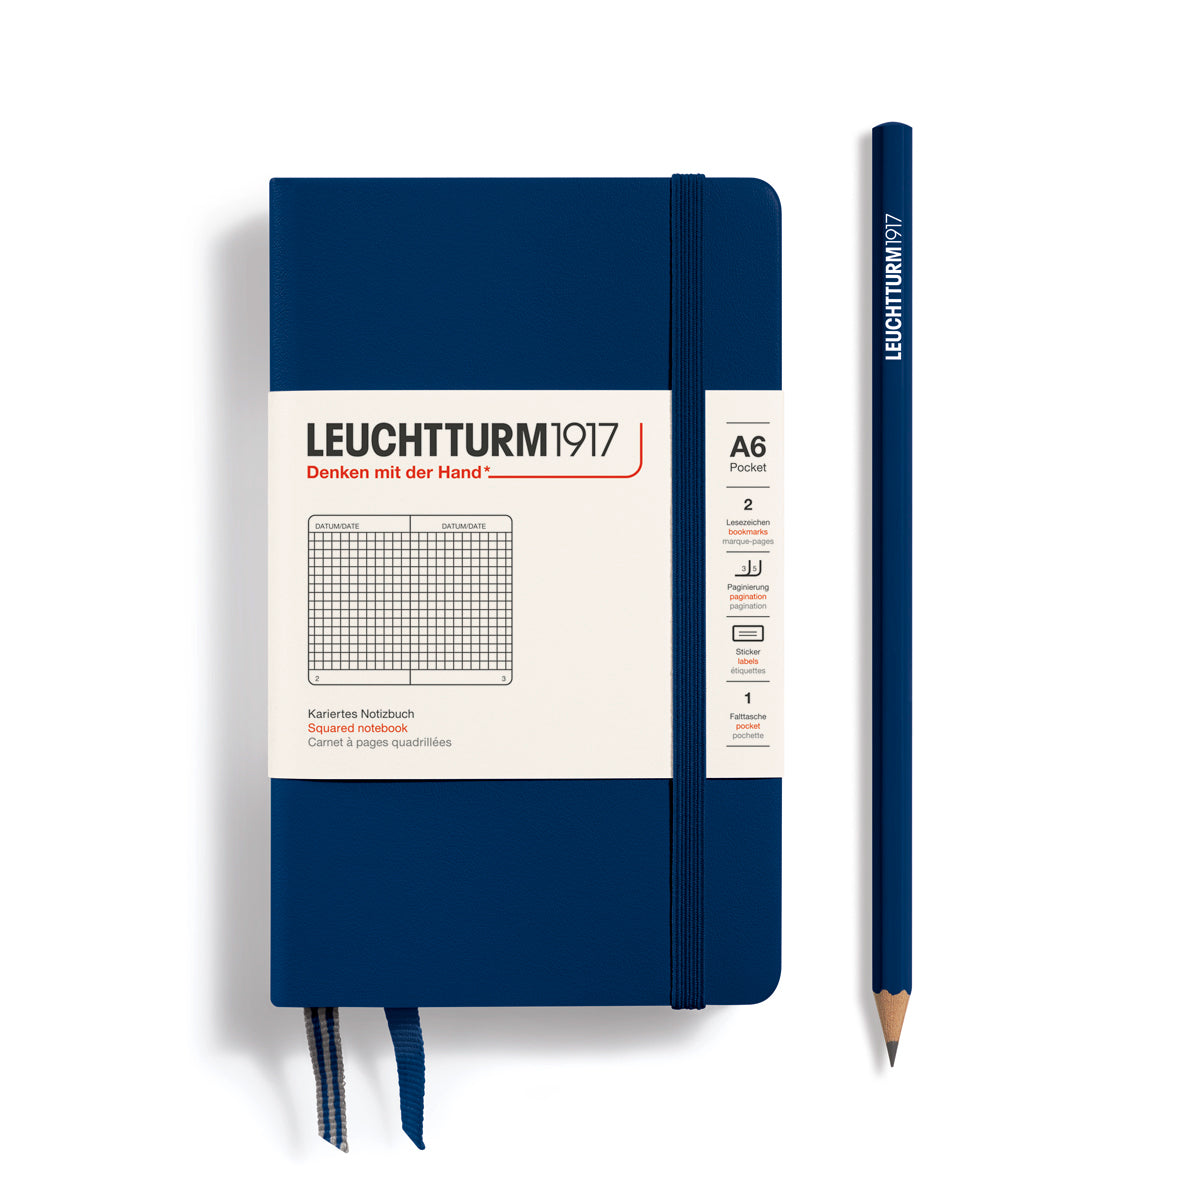 Leuchtturm1917 Notebook A6 Pocket Hardcover in navy - Penny Black - squared ruling 